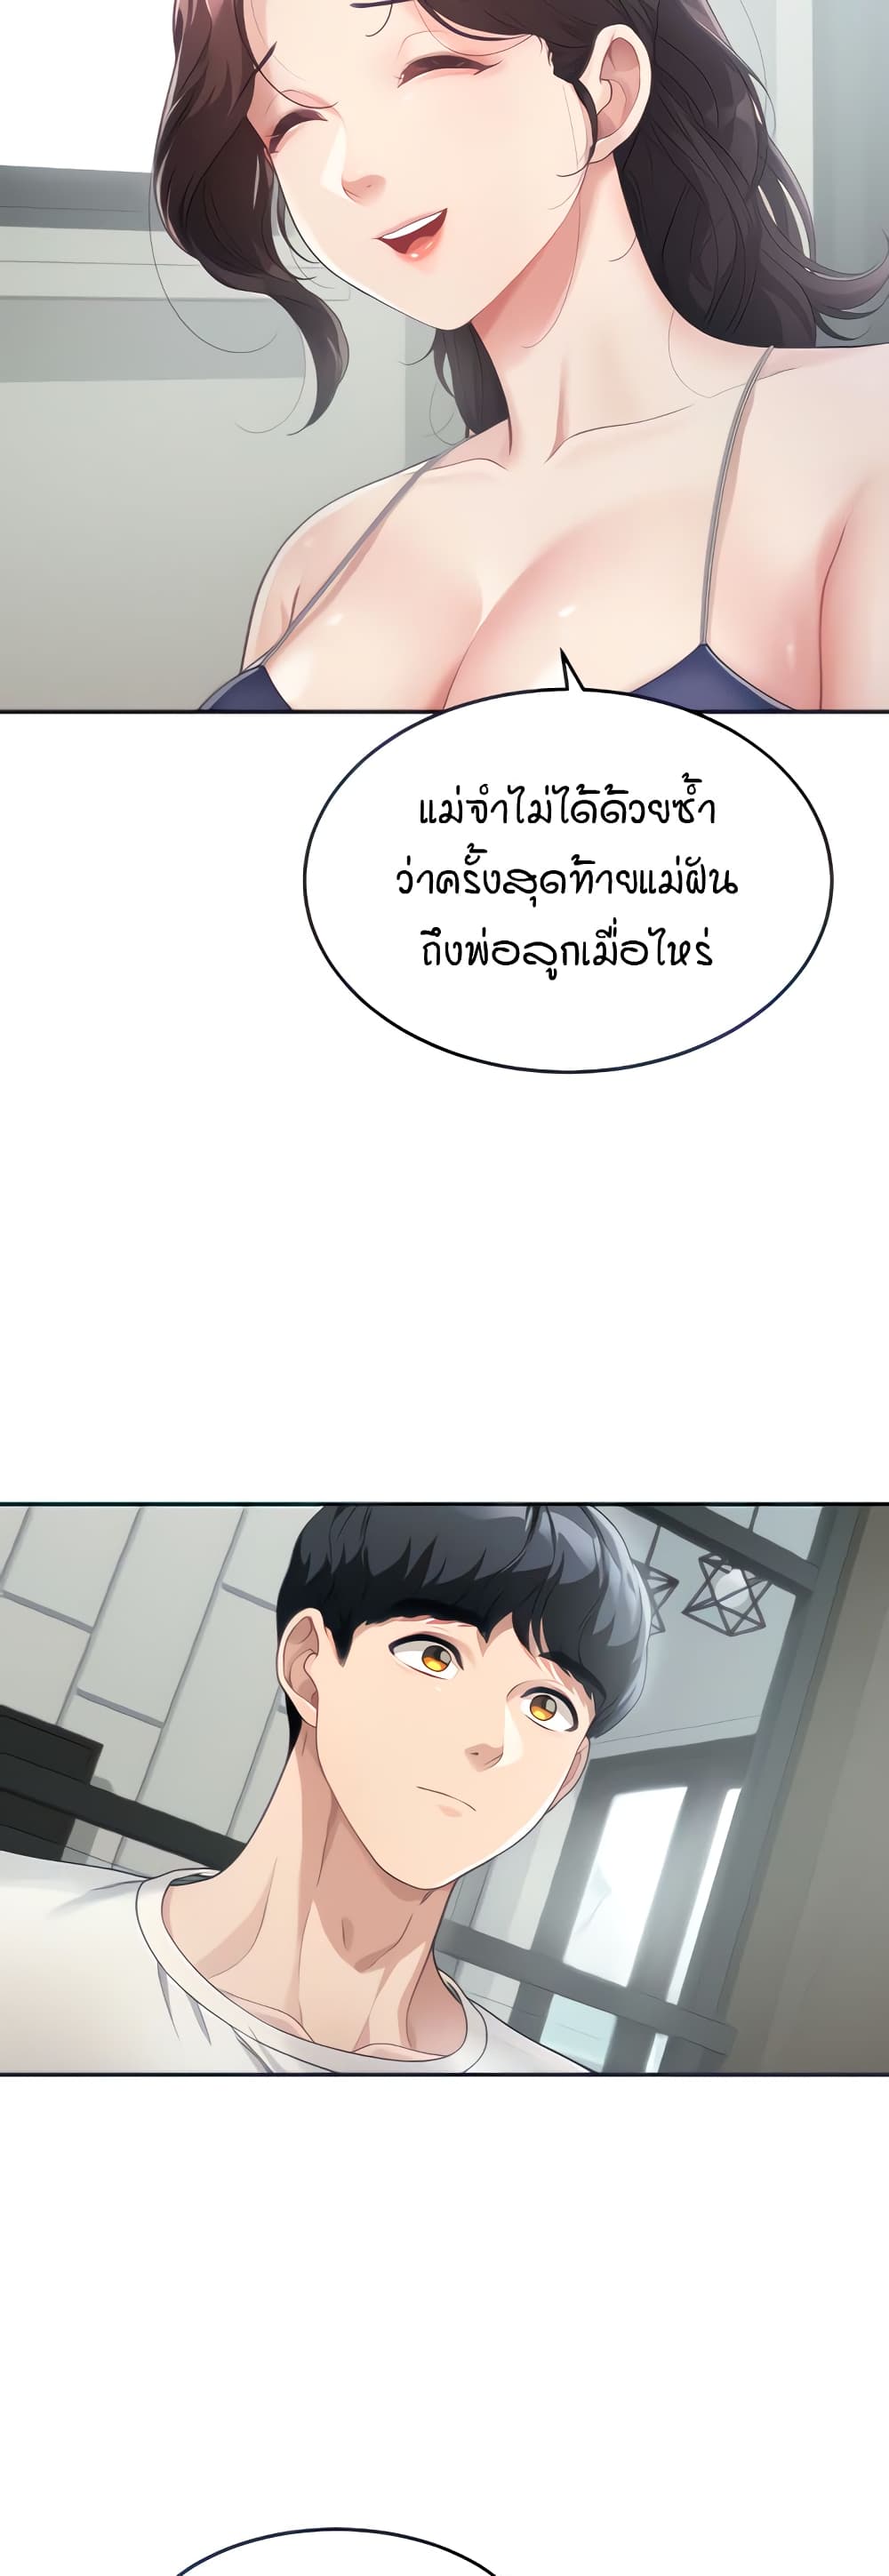 Is It Your Mother or Sister? ตอนที่ 2 ภาพ 19